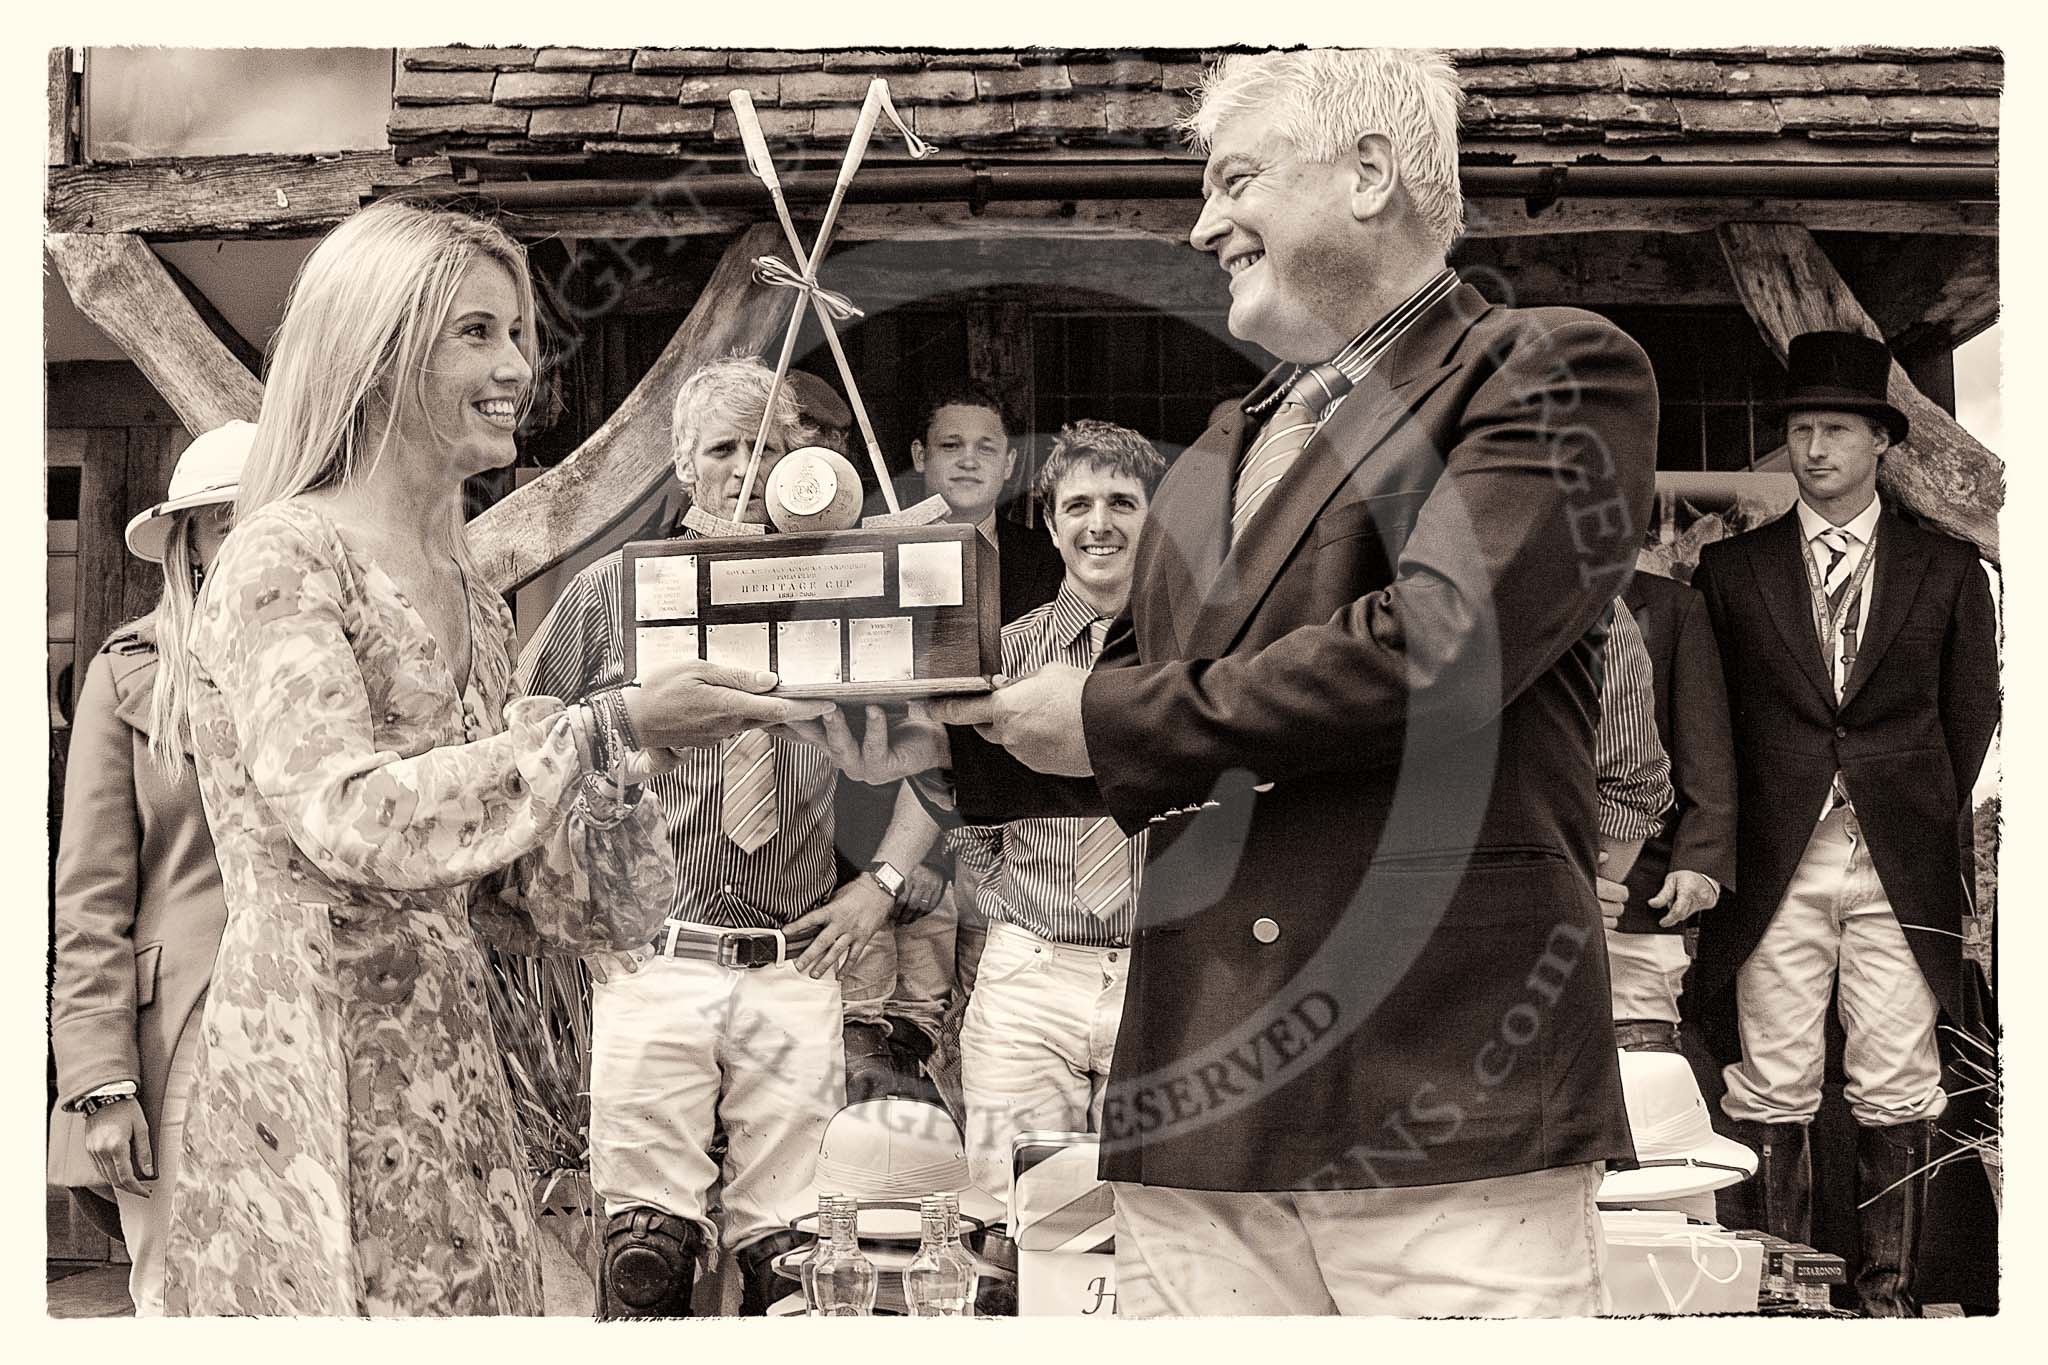 7th Heritage Polo Cup finals: Sponsor Claire Cotton of "Cotton & Gems" presenting the Trophy 
HERITAGE POLO CUP to  WINNER 2012 Silver Fox Polo Patron Parke Bradley..
Hurtwood Park Polo Club,
Ewhurst Green,
Surrey,
United Kingdom,
on 05 August 2012 at 14:40, image #87